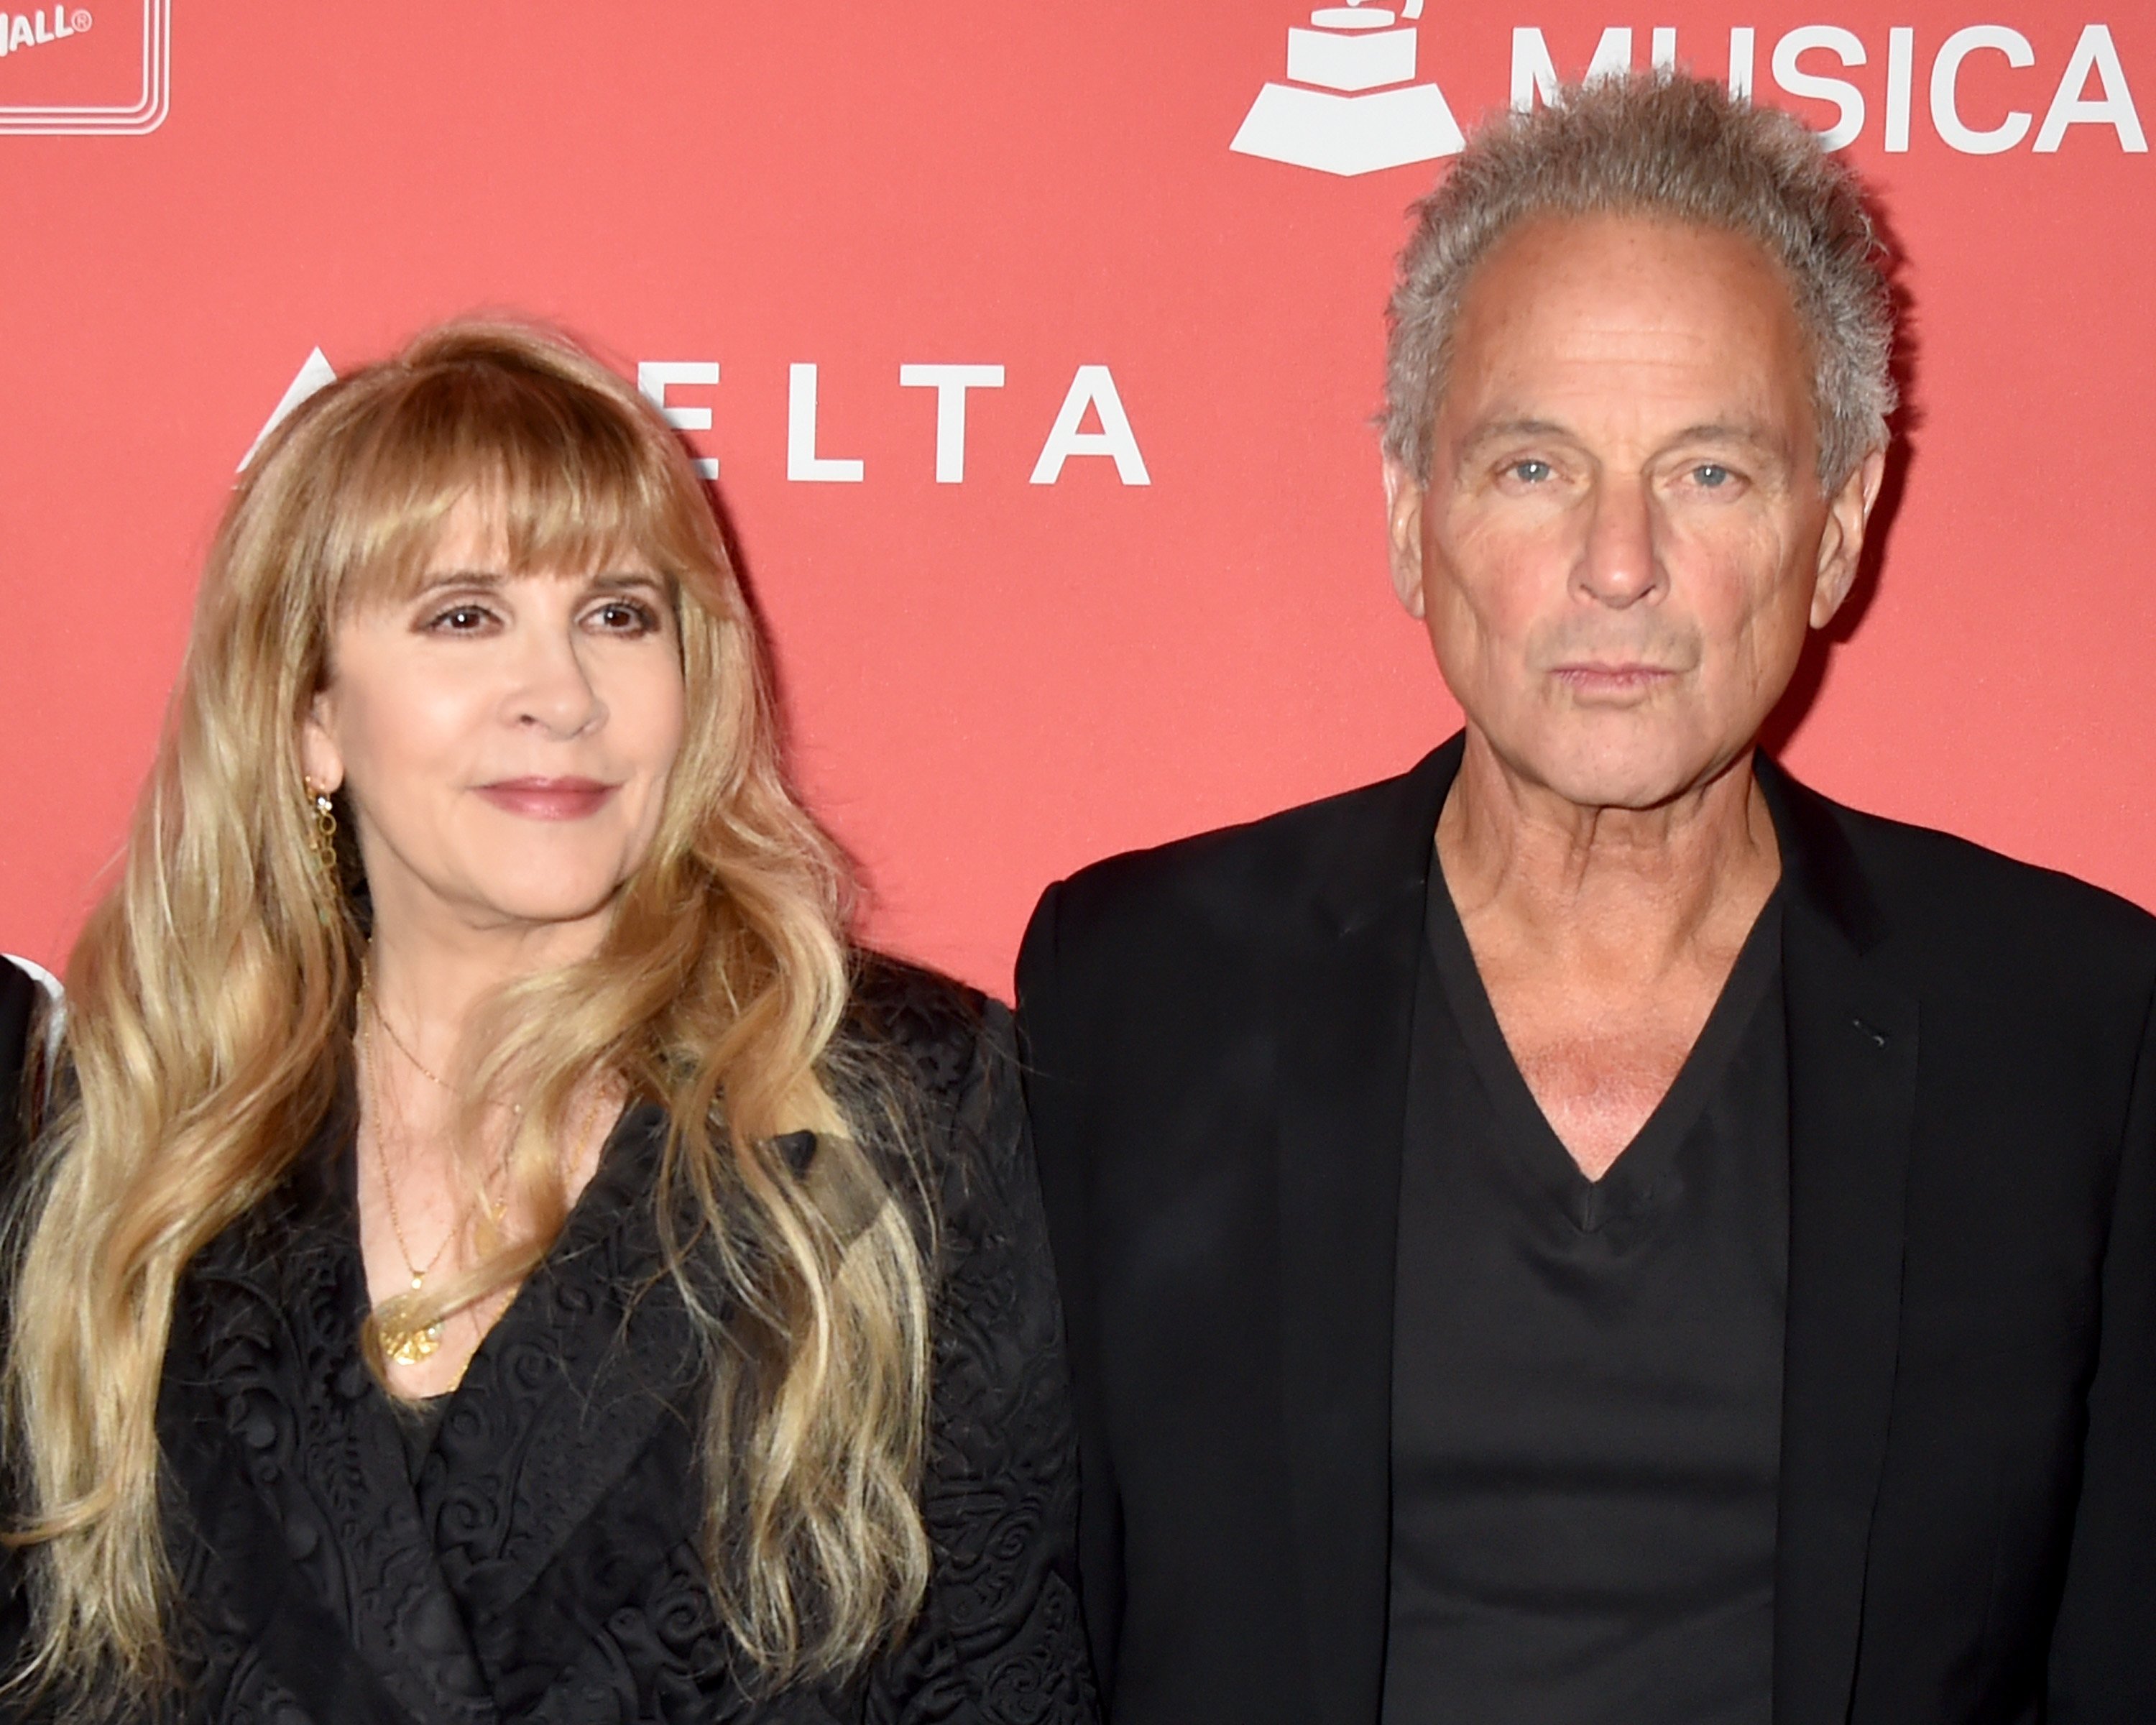 Stevie Nicks and Lindsey Buckingham stand side-by-side